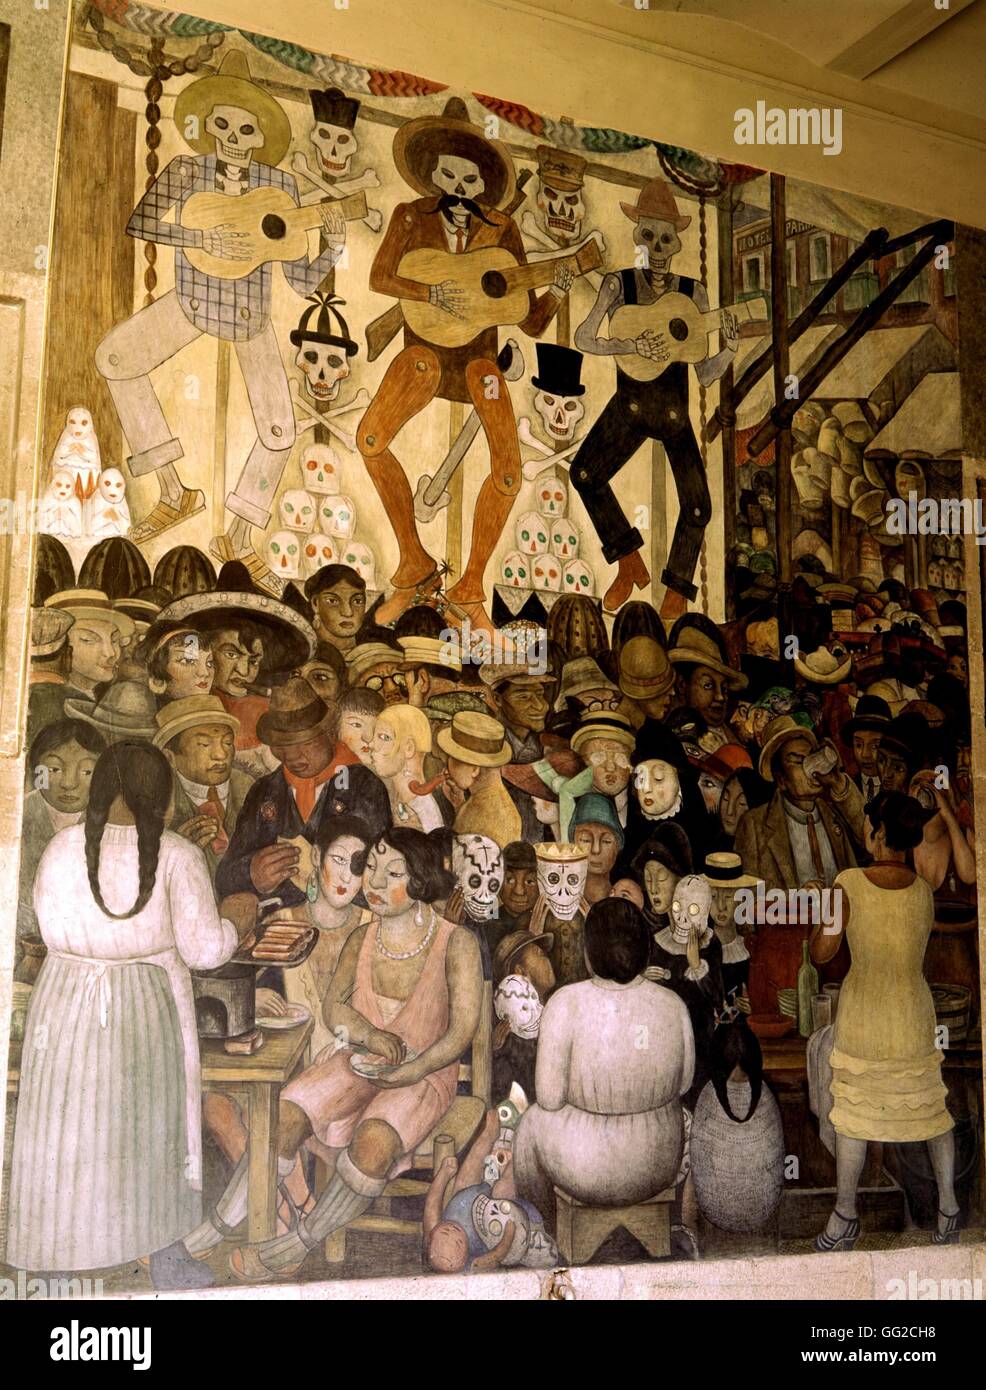 Diego Rivera fresco: Day of the Dead 1927-1928 Mexico, Ministry of Education Photo Guermeur Stock Photo